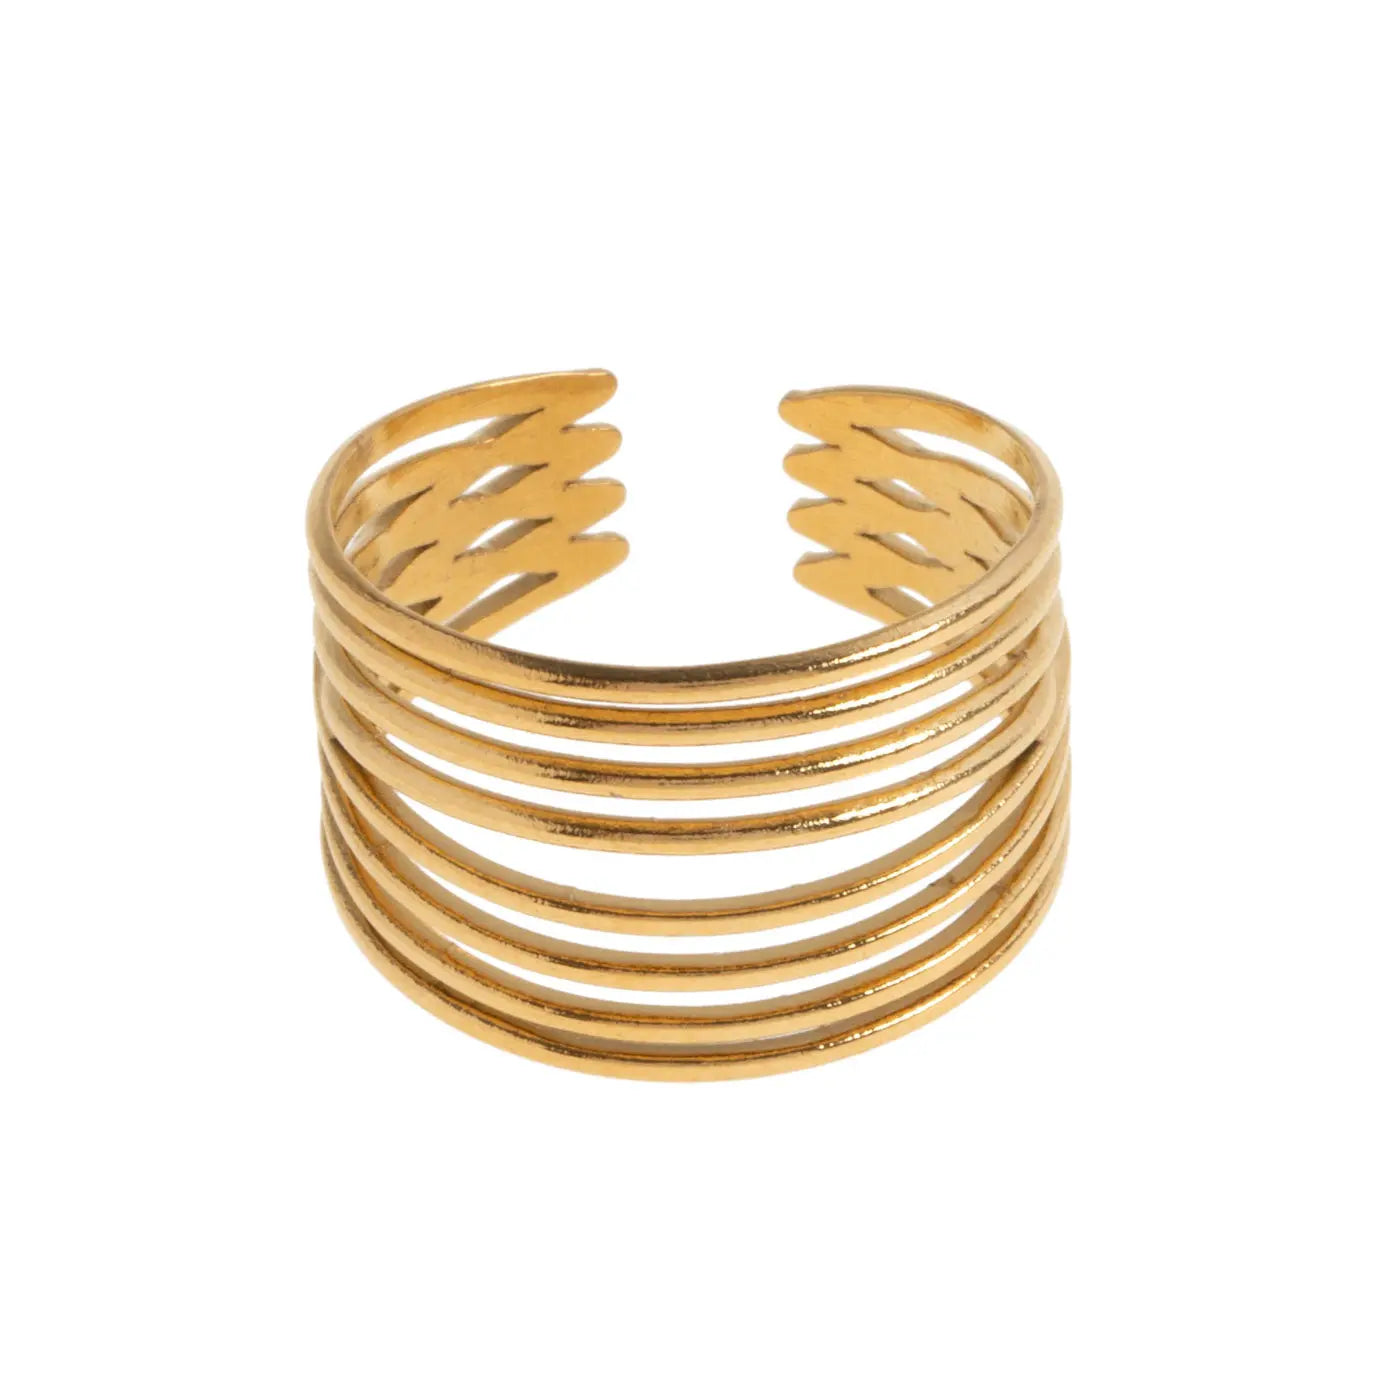 Chloé - Statement Ring Stainless Steel